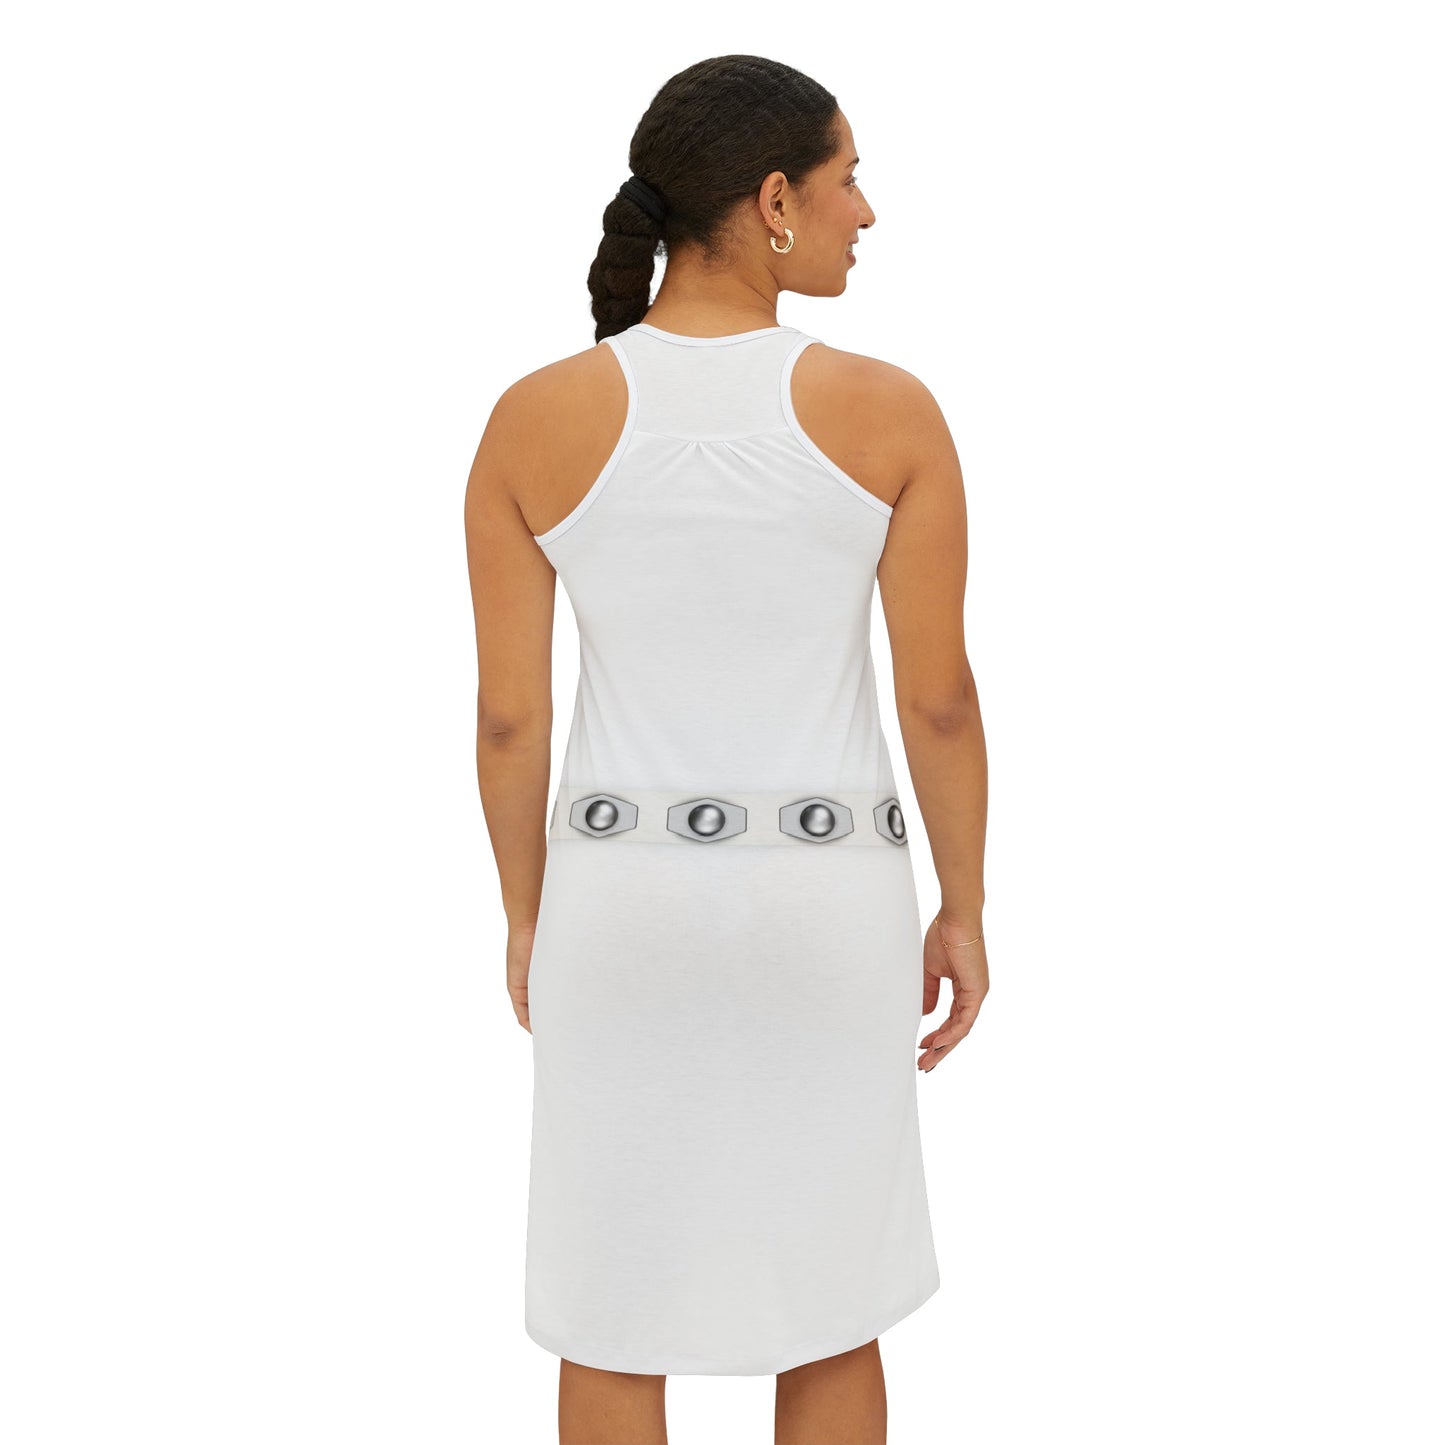 The Leia Women's Racerback Dress All Over PrintAOPTank TopWrong Lever Clothing